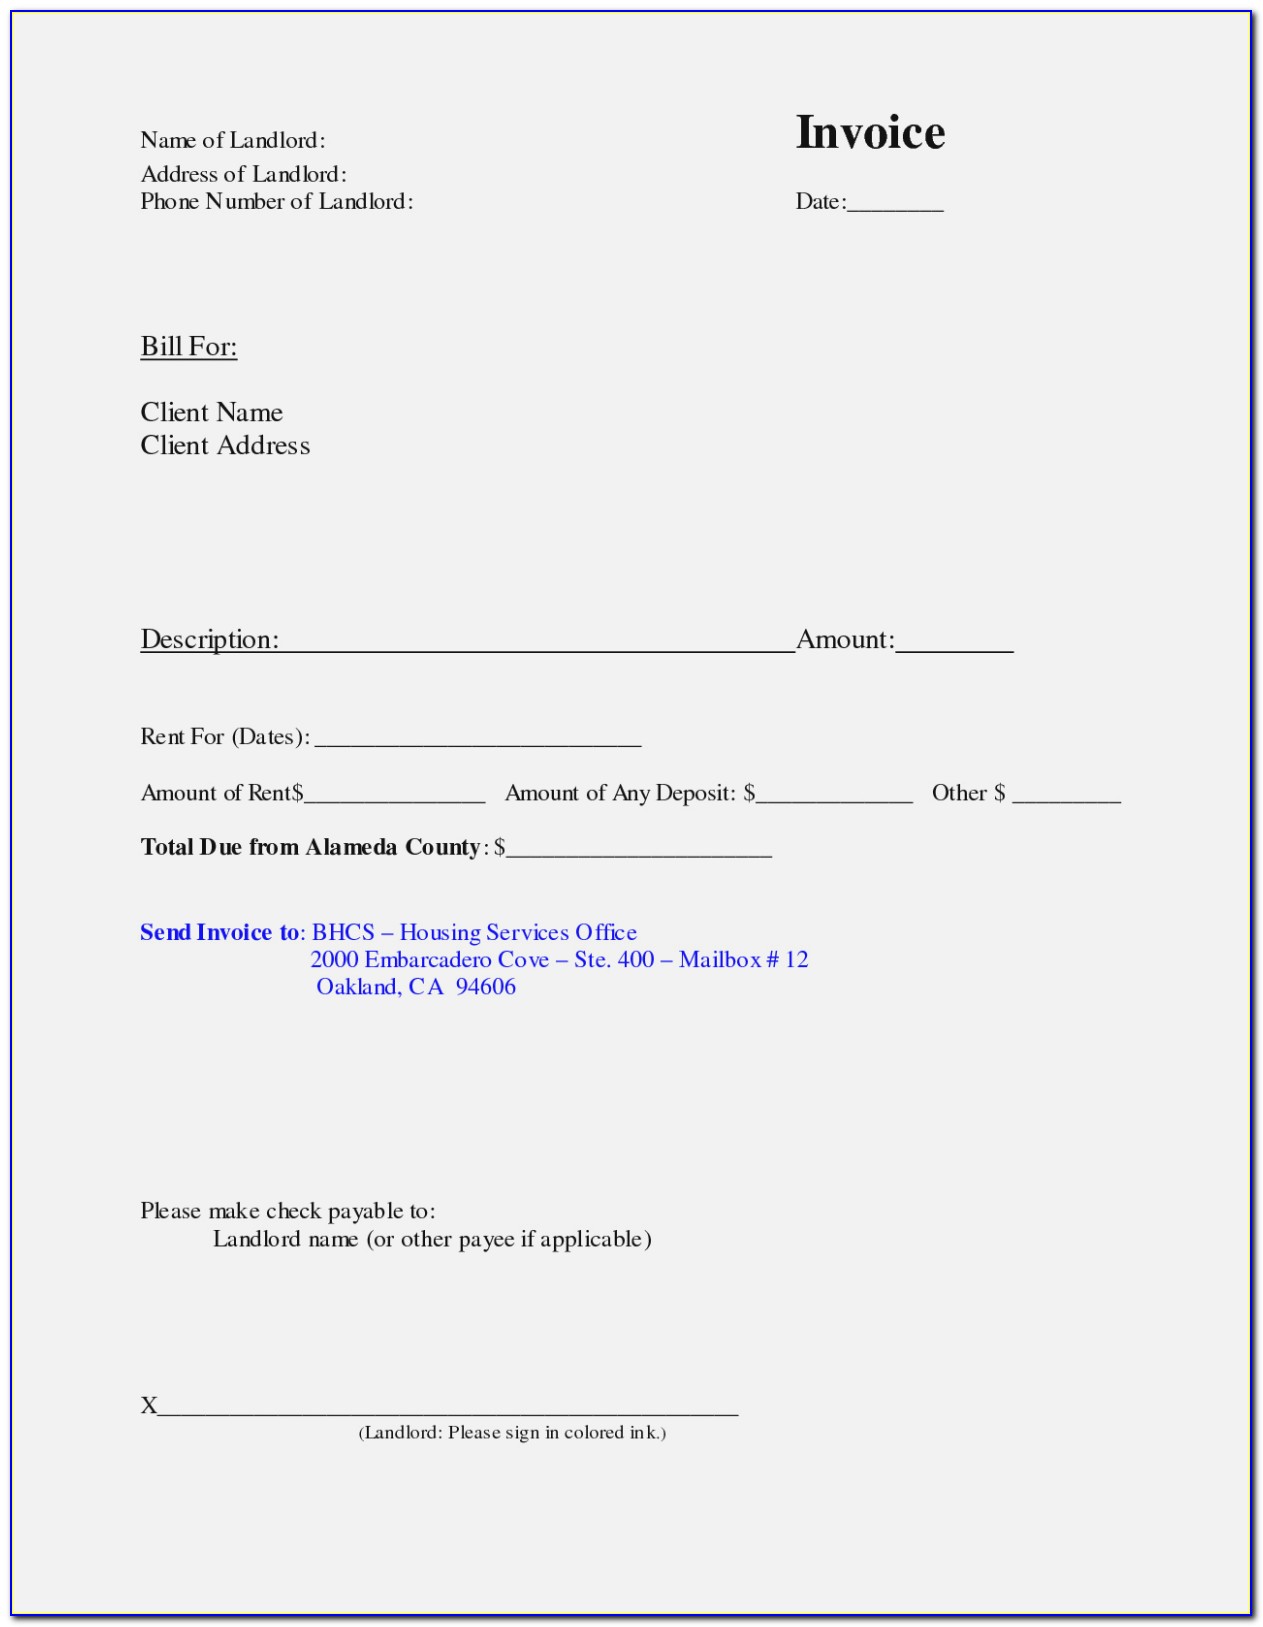 invoice-design-excel-template-canada-and-receipt-form-in-doc-free-free-invoice-template-canada